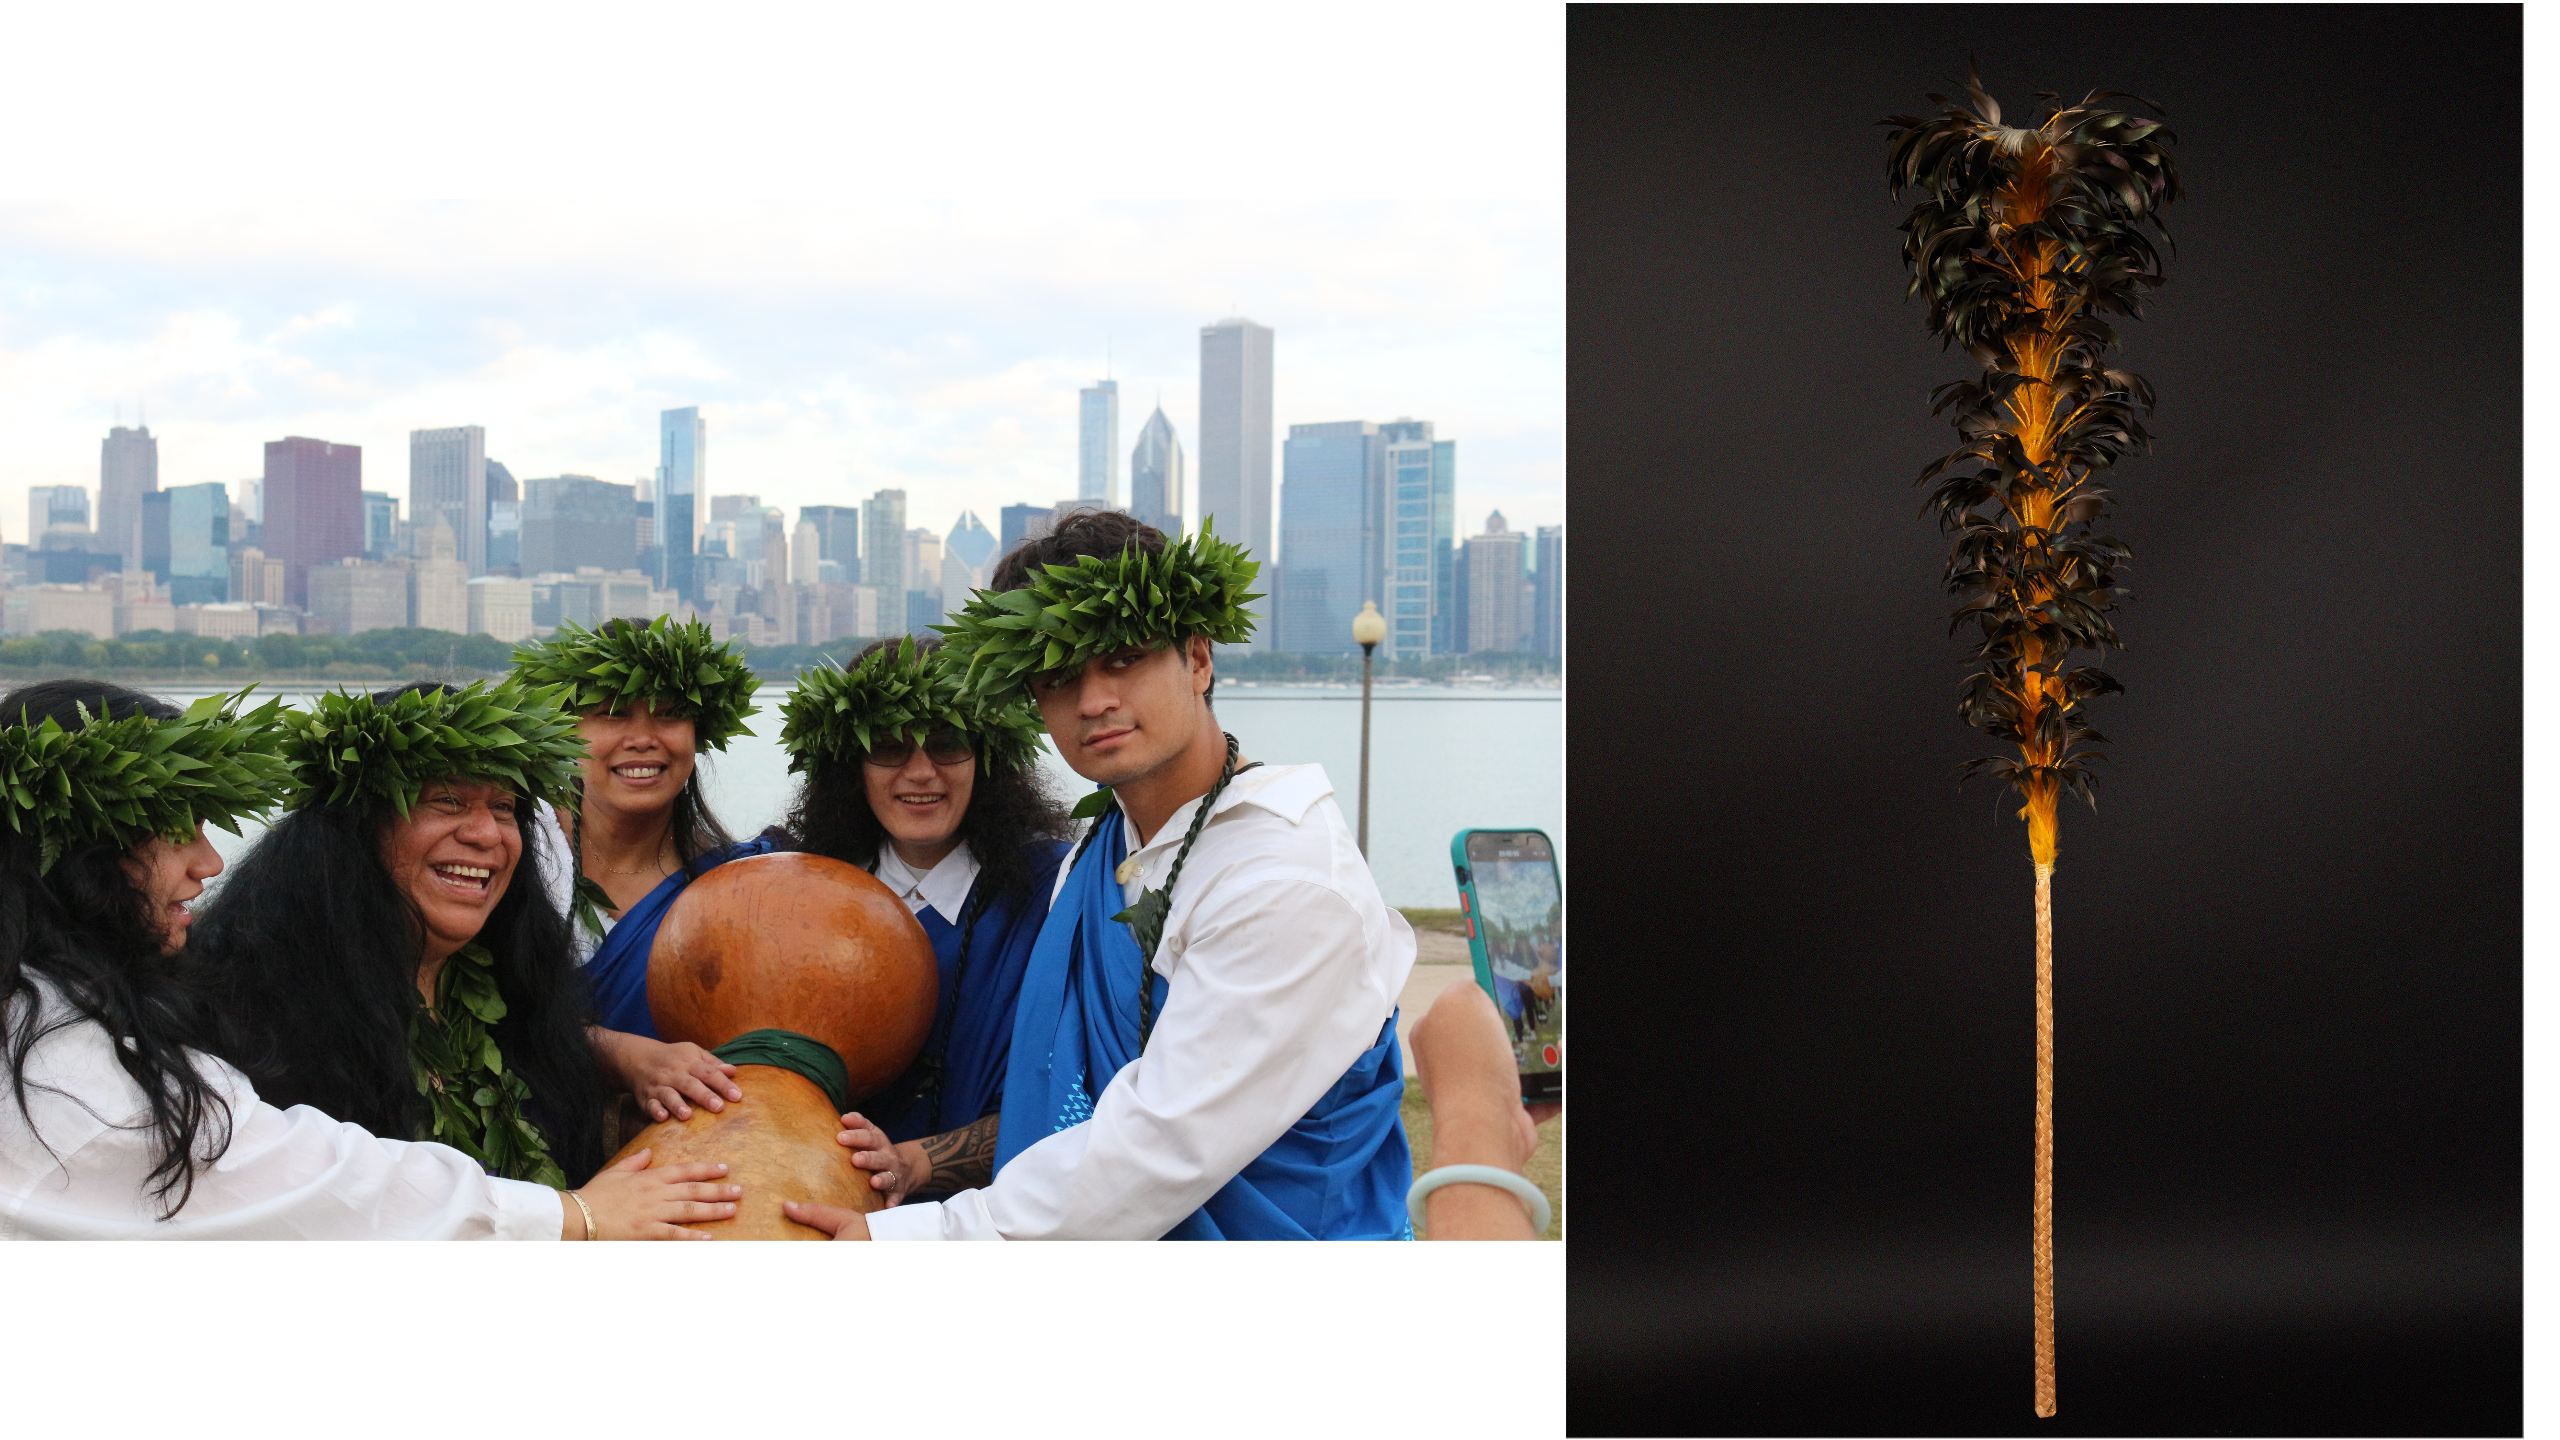 Left: Hula practitioners gather around an ̀ipu heke, a traditional Hawaiian percussion implement made from two gourds. Right: A kahili—the sacred royal standard of the Hawaiian monarchy—made of wood and feathers.